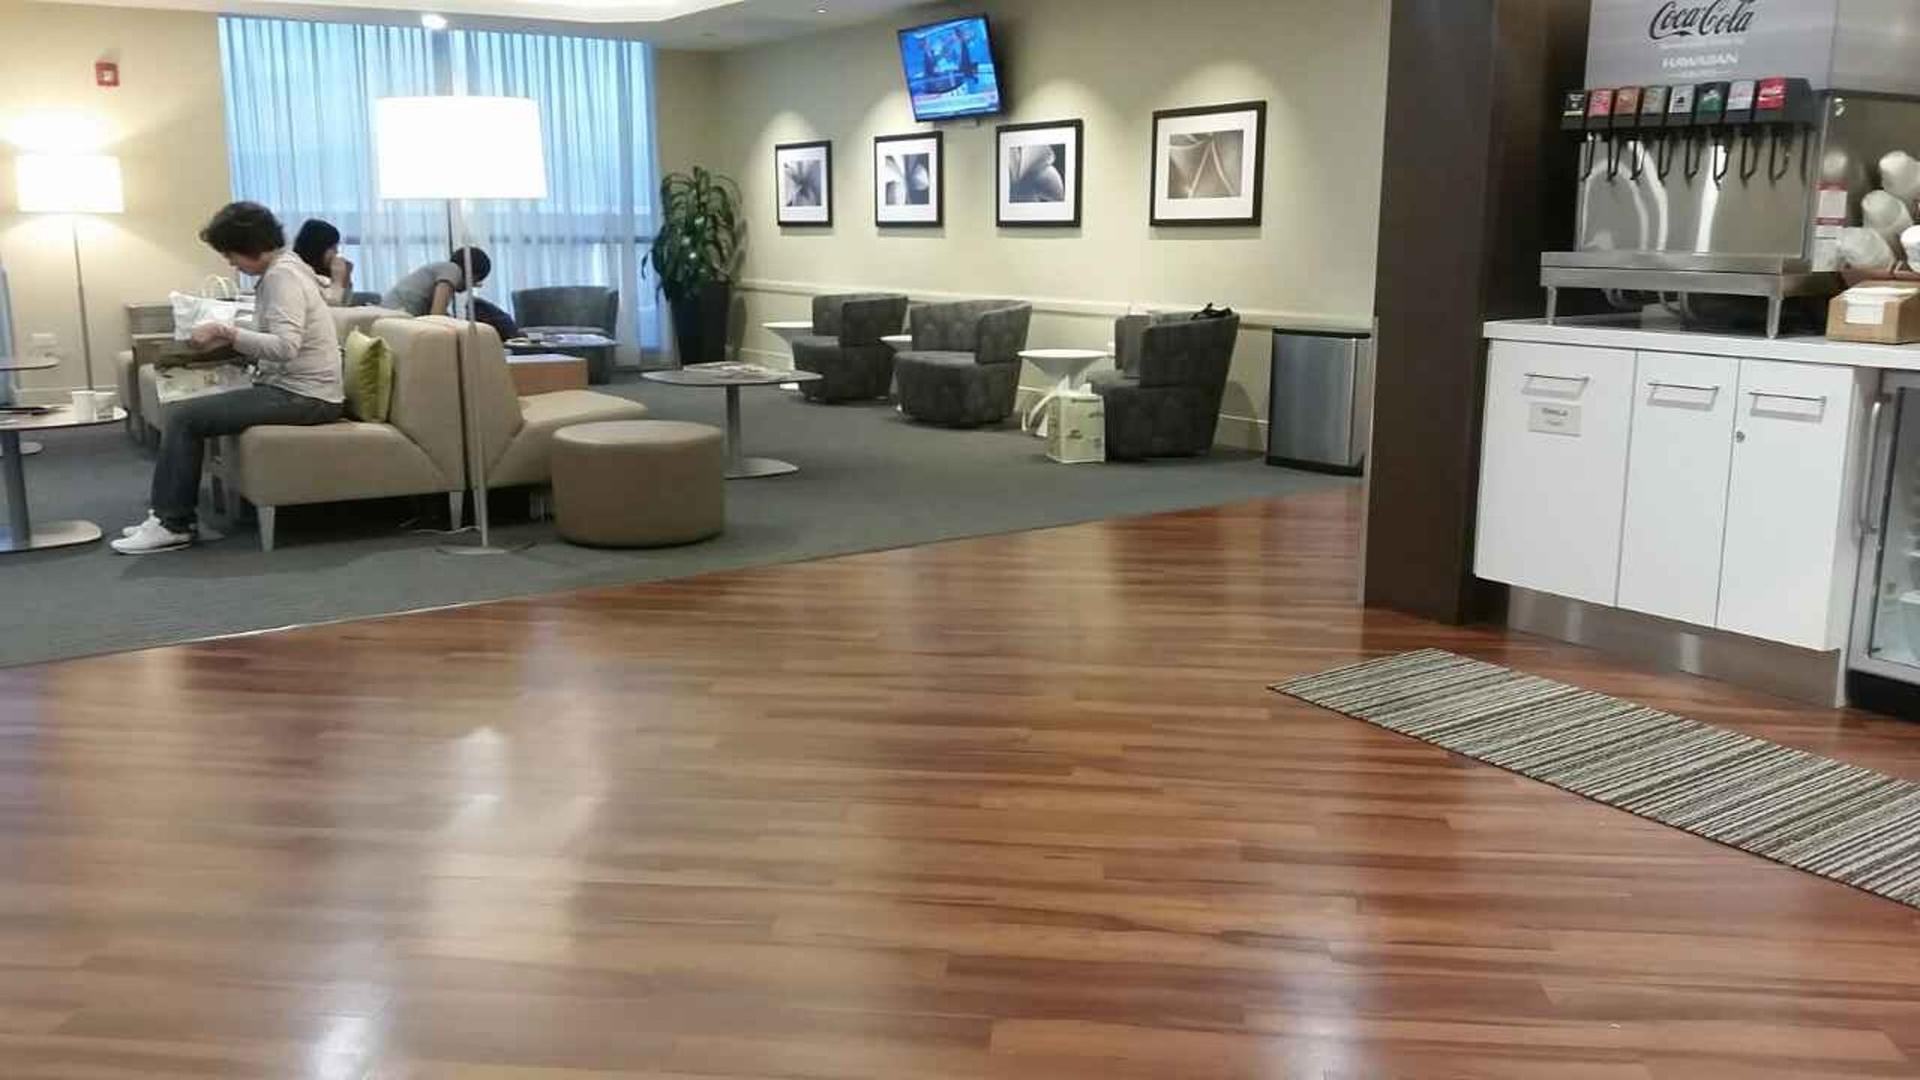 Hawaiian Airlines The Plumeria Lounge image 18 of 41